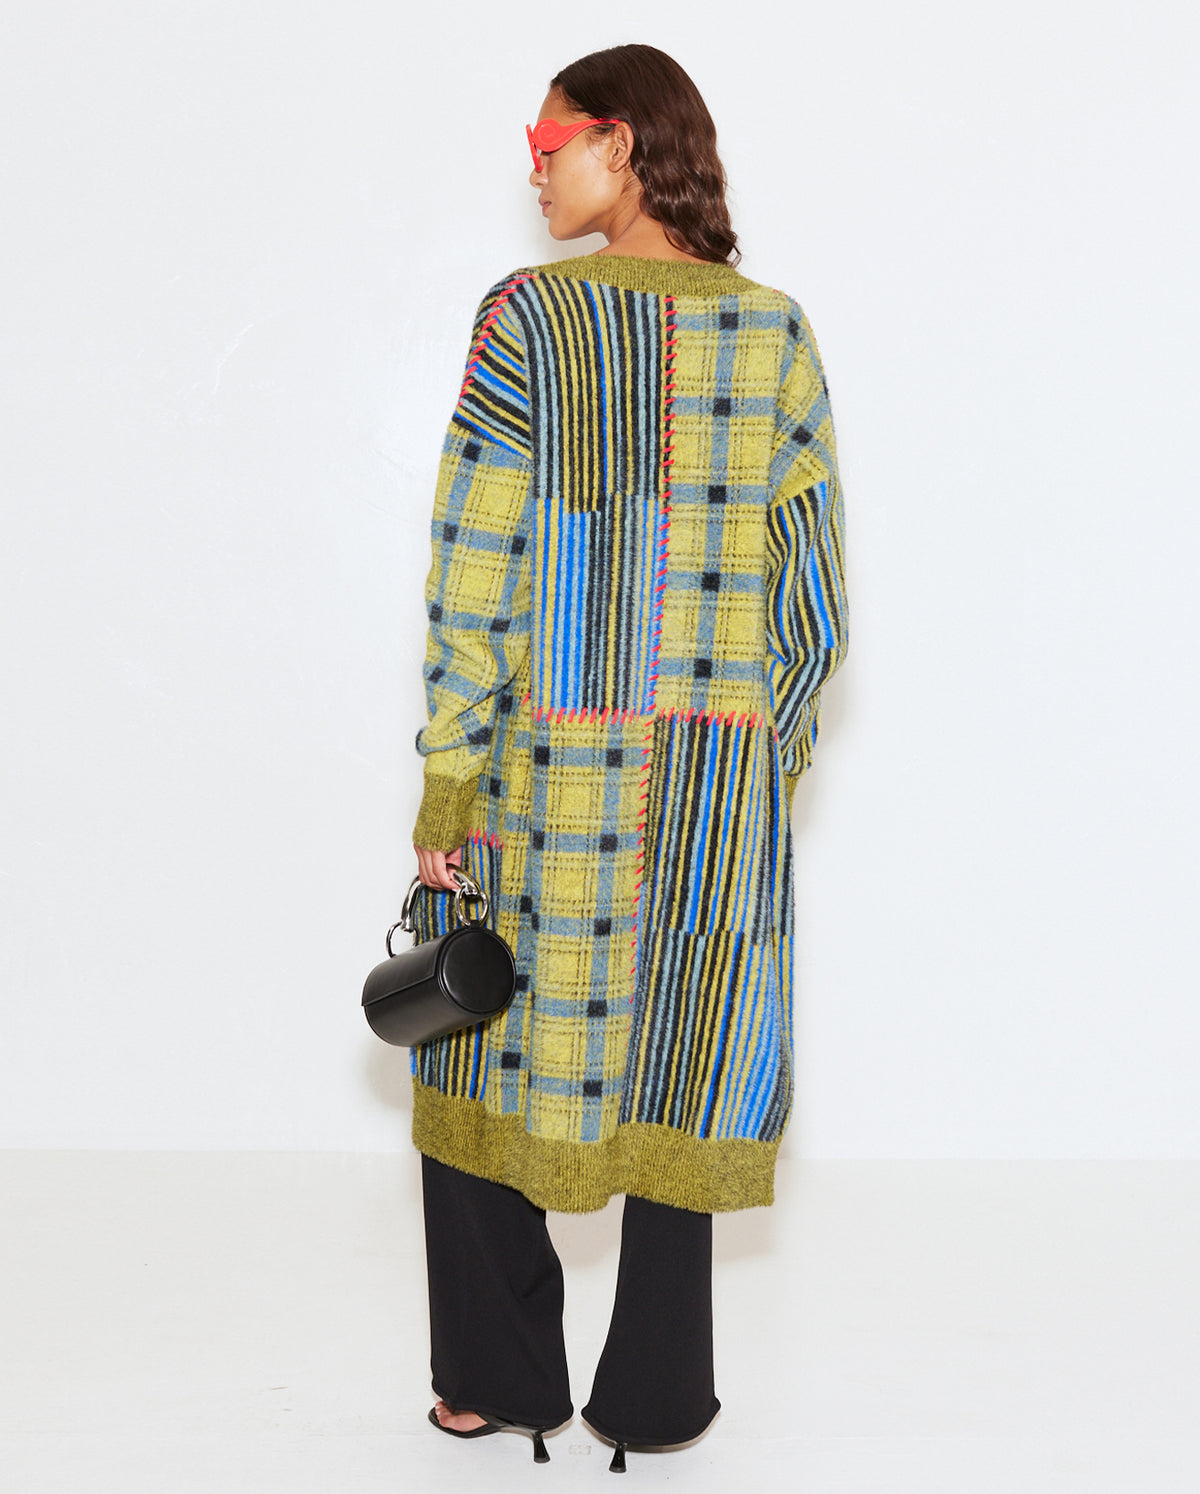 Castle Cardigan - Yellow Plaid/Stacked Stripe